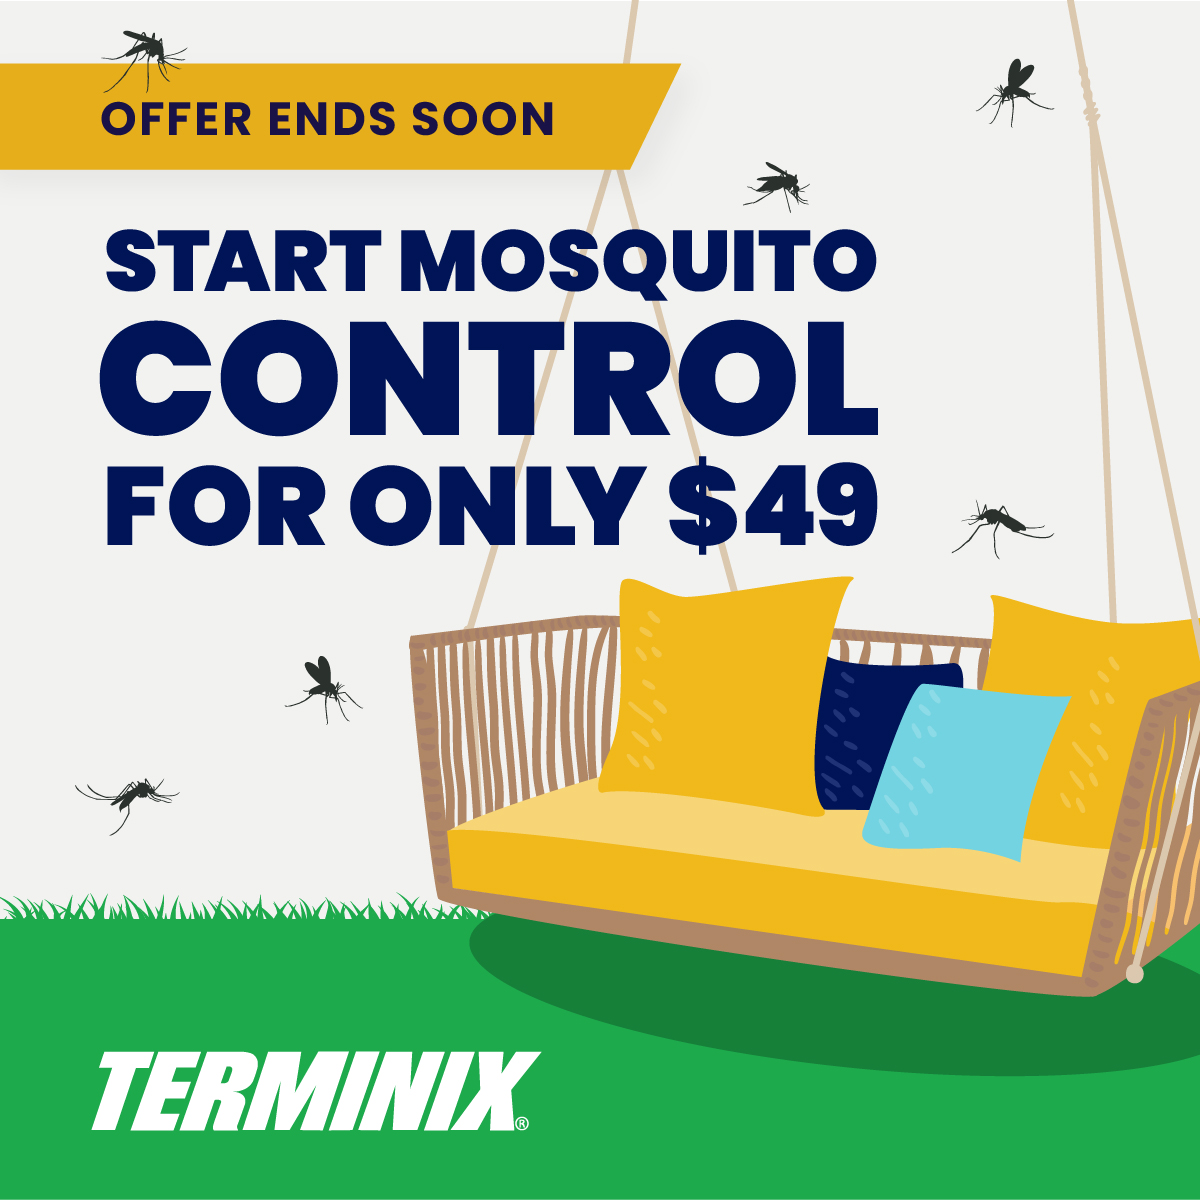 Keep your yard, family, and pets protected from mosquitoes this spring. With these pre-season savings, start mosquito control today for only $49 while this offer lasts. Limitations and exclusions apply. hubs.ly/Q01KCr8C0